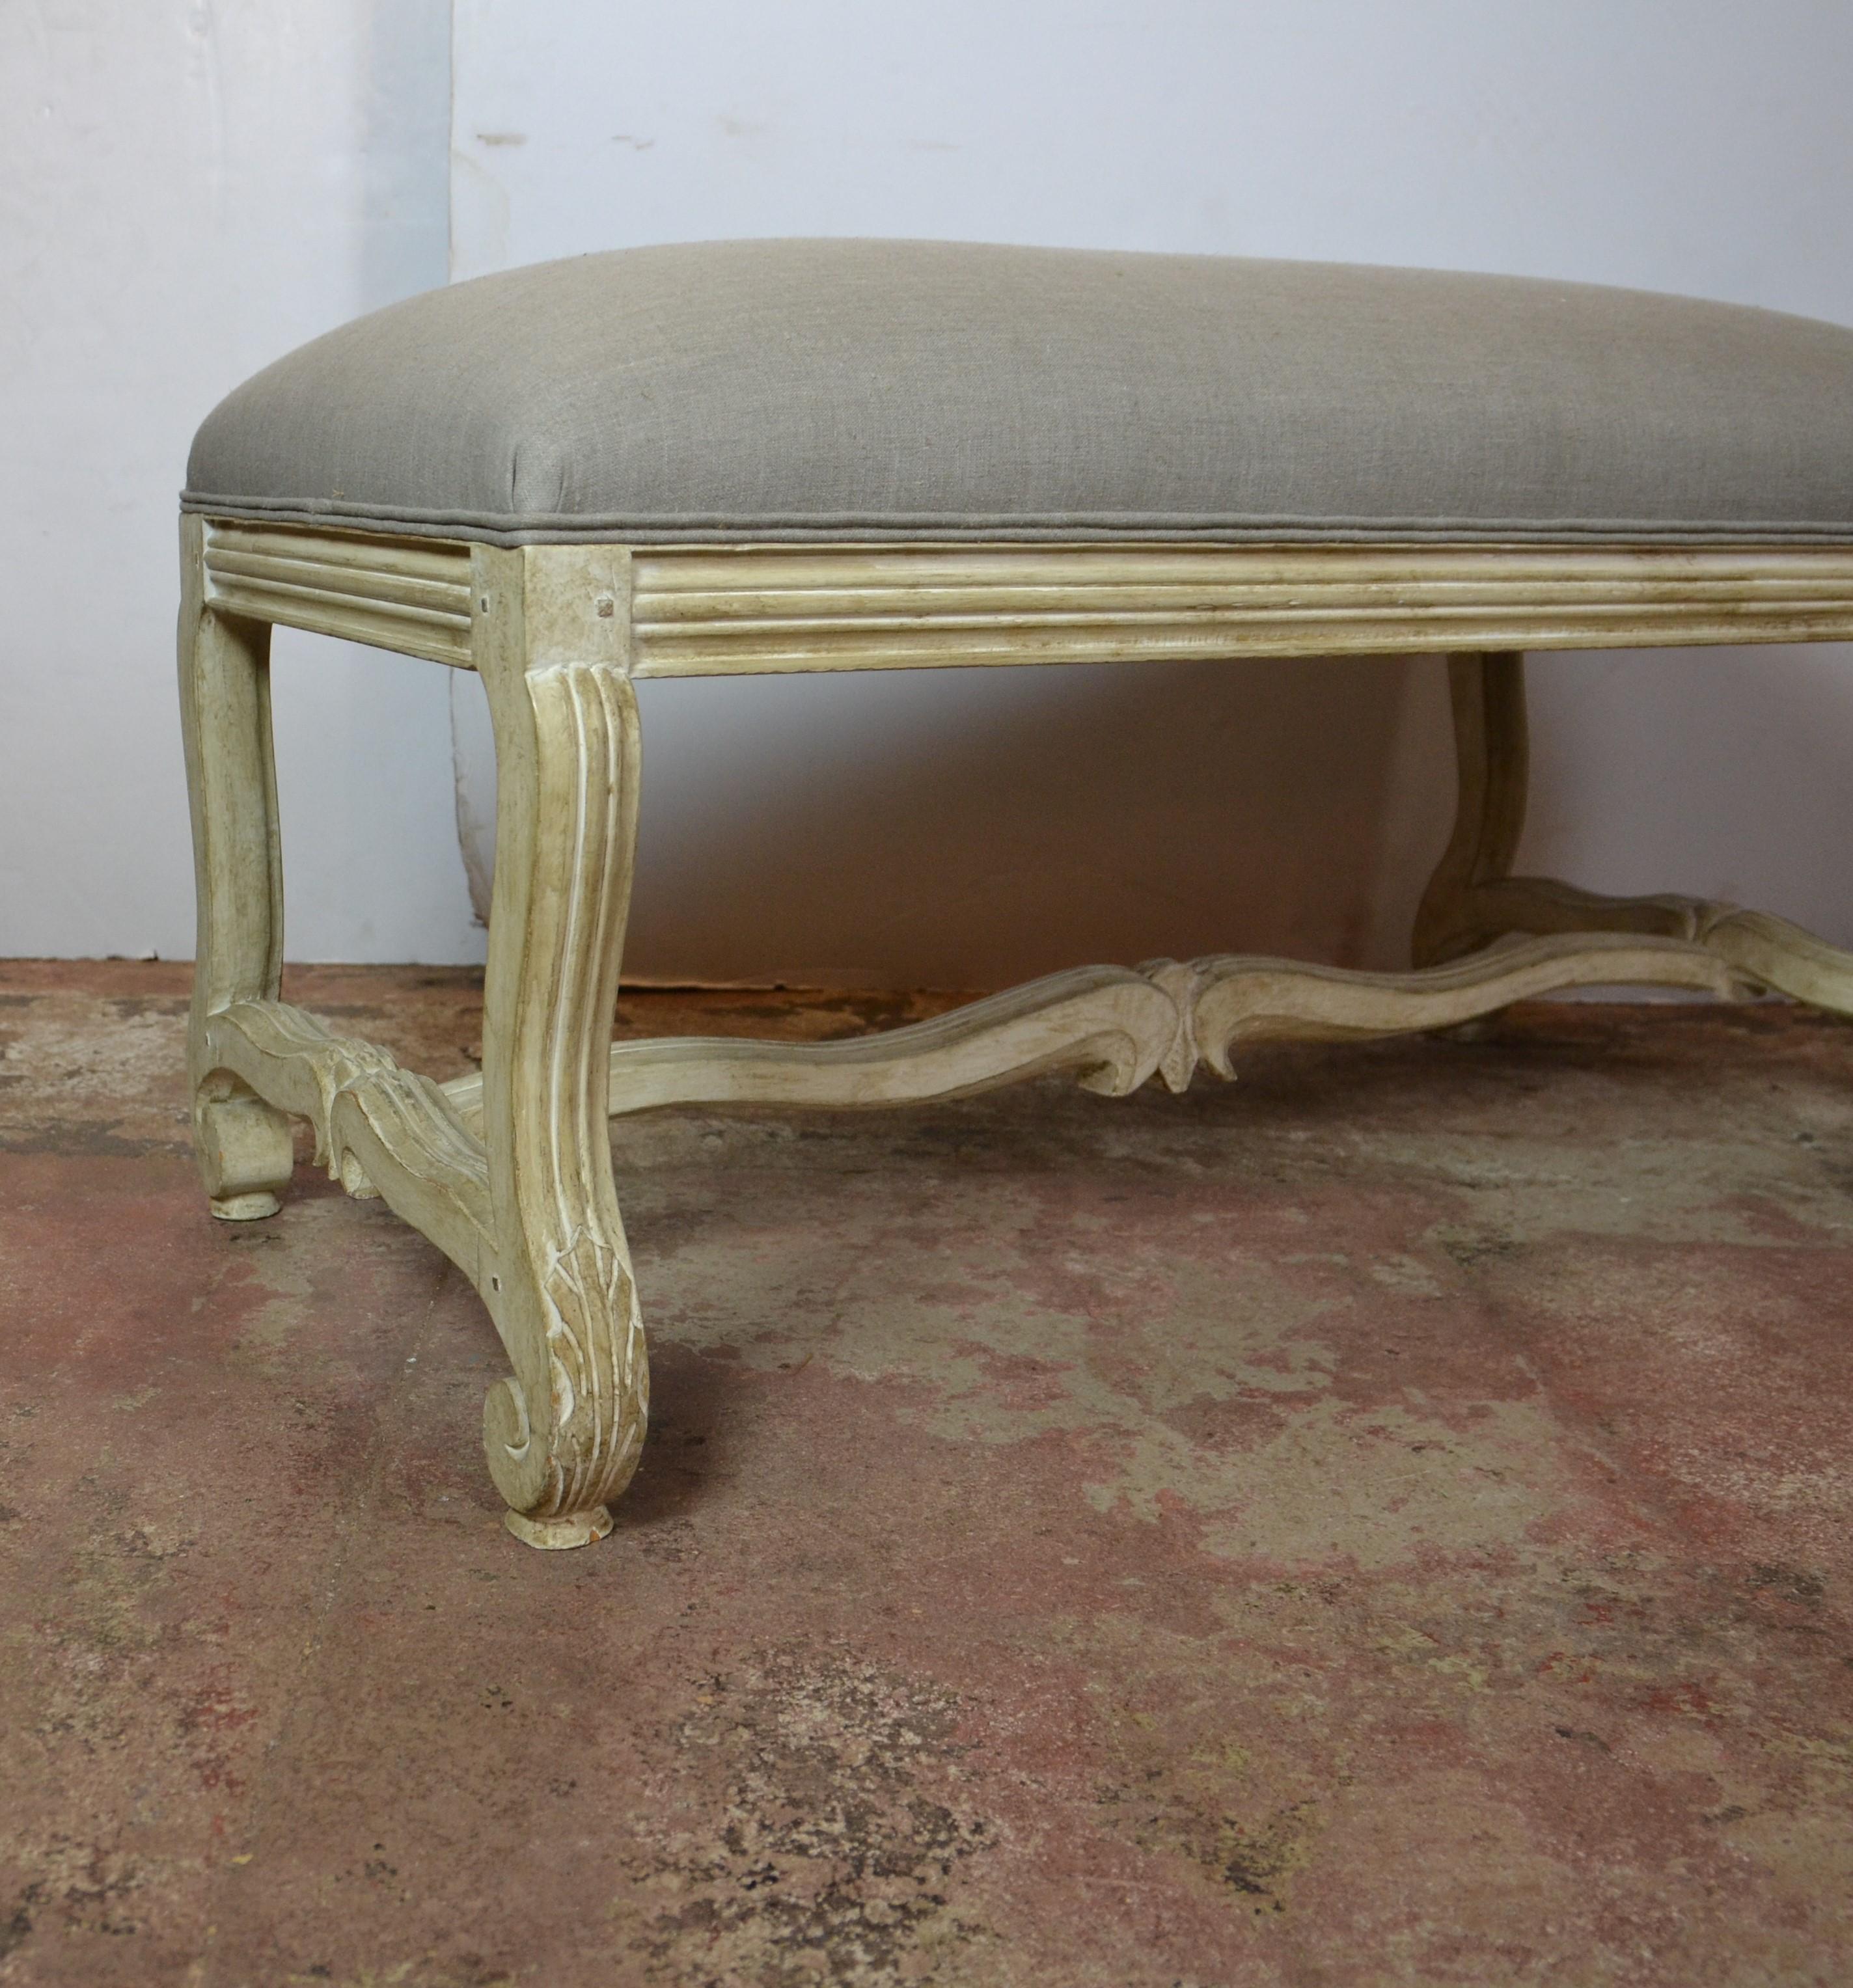 Natural finish wood-carved bench. Upholstered in light gray linen.